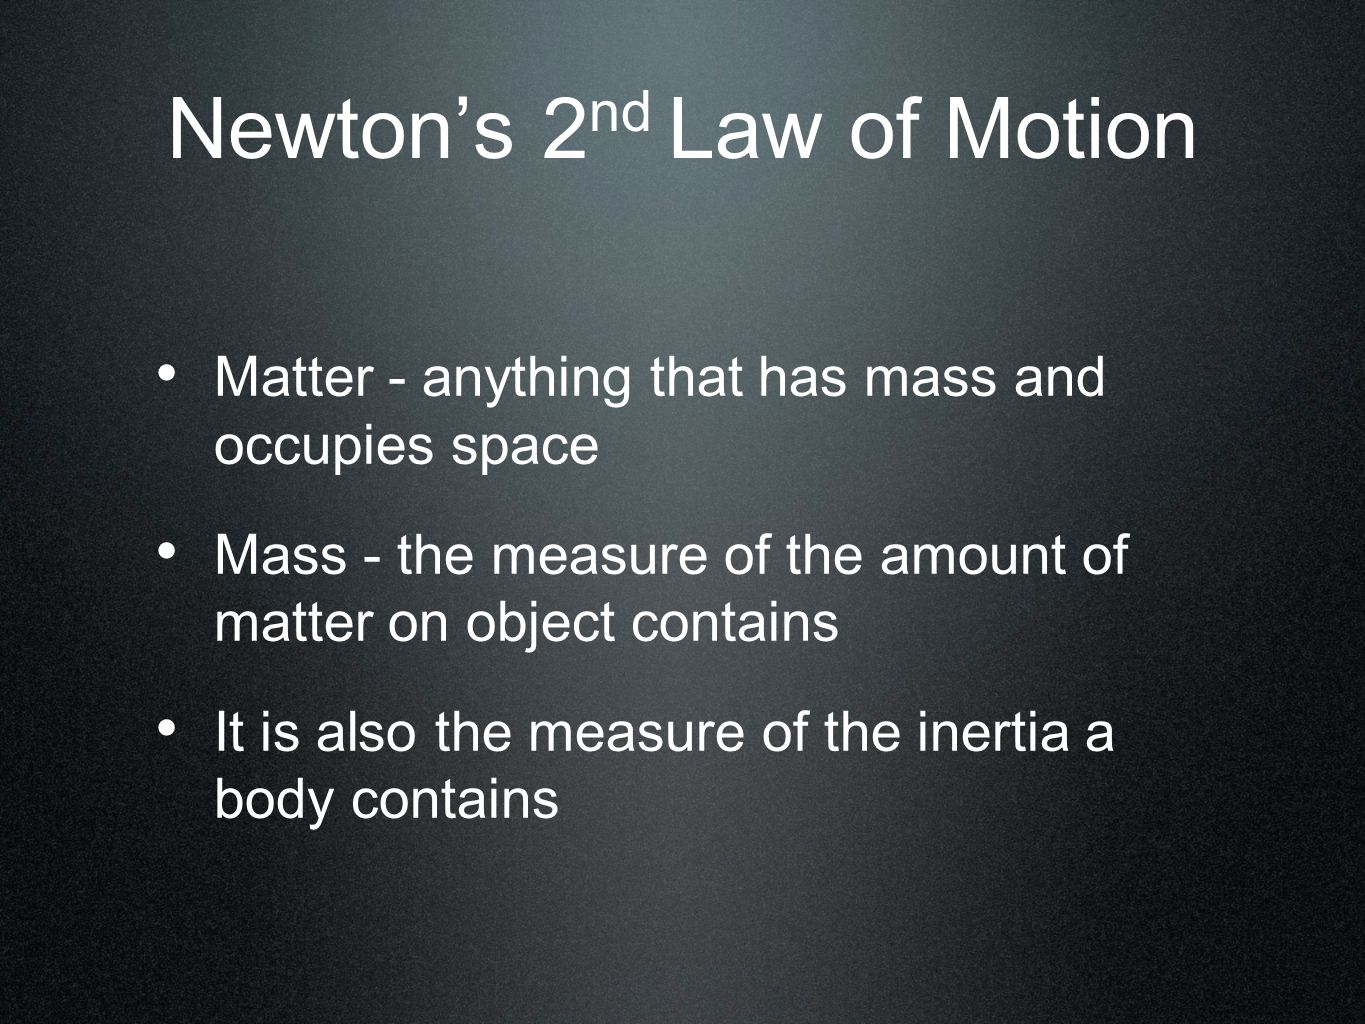 Newton’s 2 nd Law of Motion Matter - anything that has mass and occupies space Mass - the measure of the amount of matter on object contains It is also the measure of the inertia a body contains